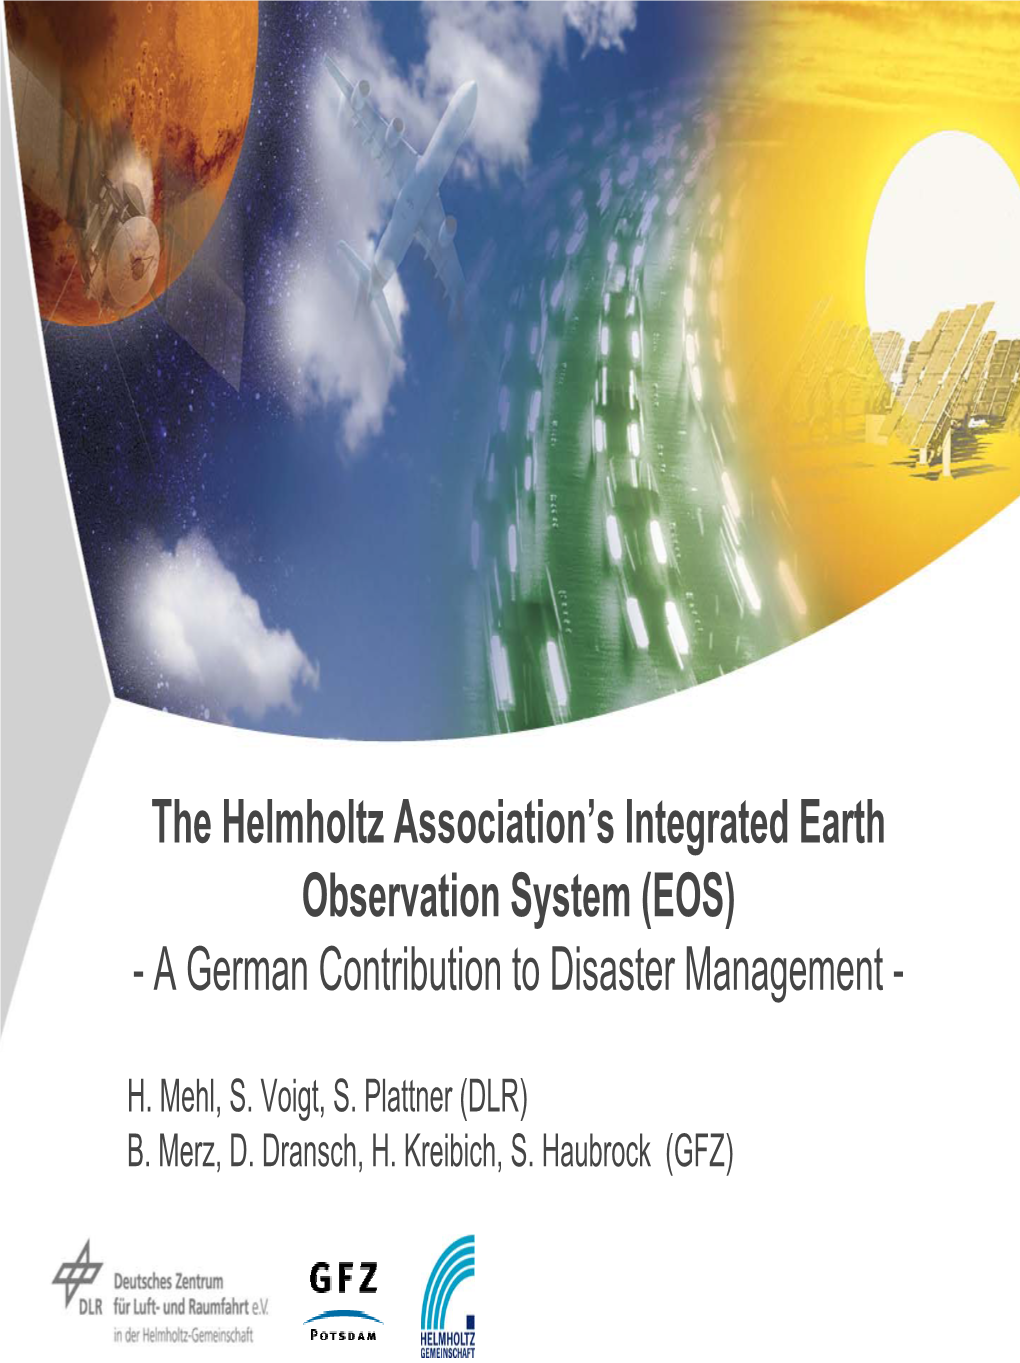 The Helmholtz Association's Integrated Earth Observation